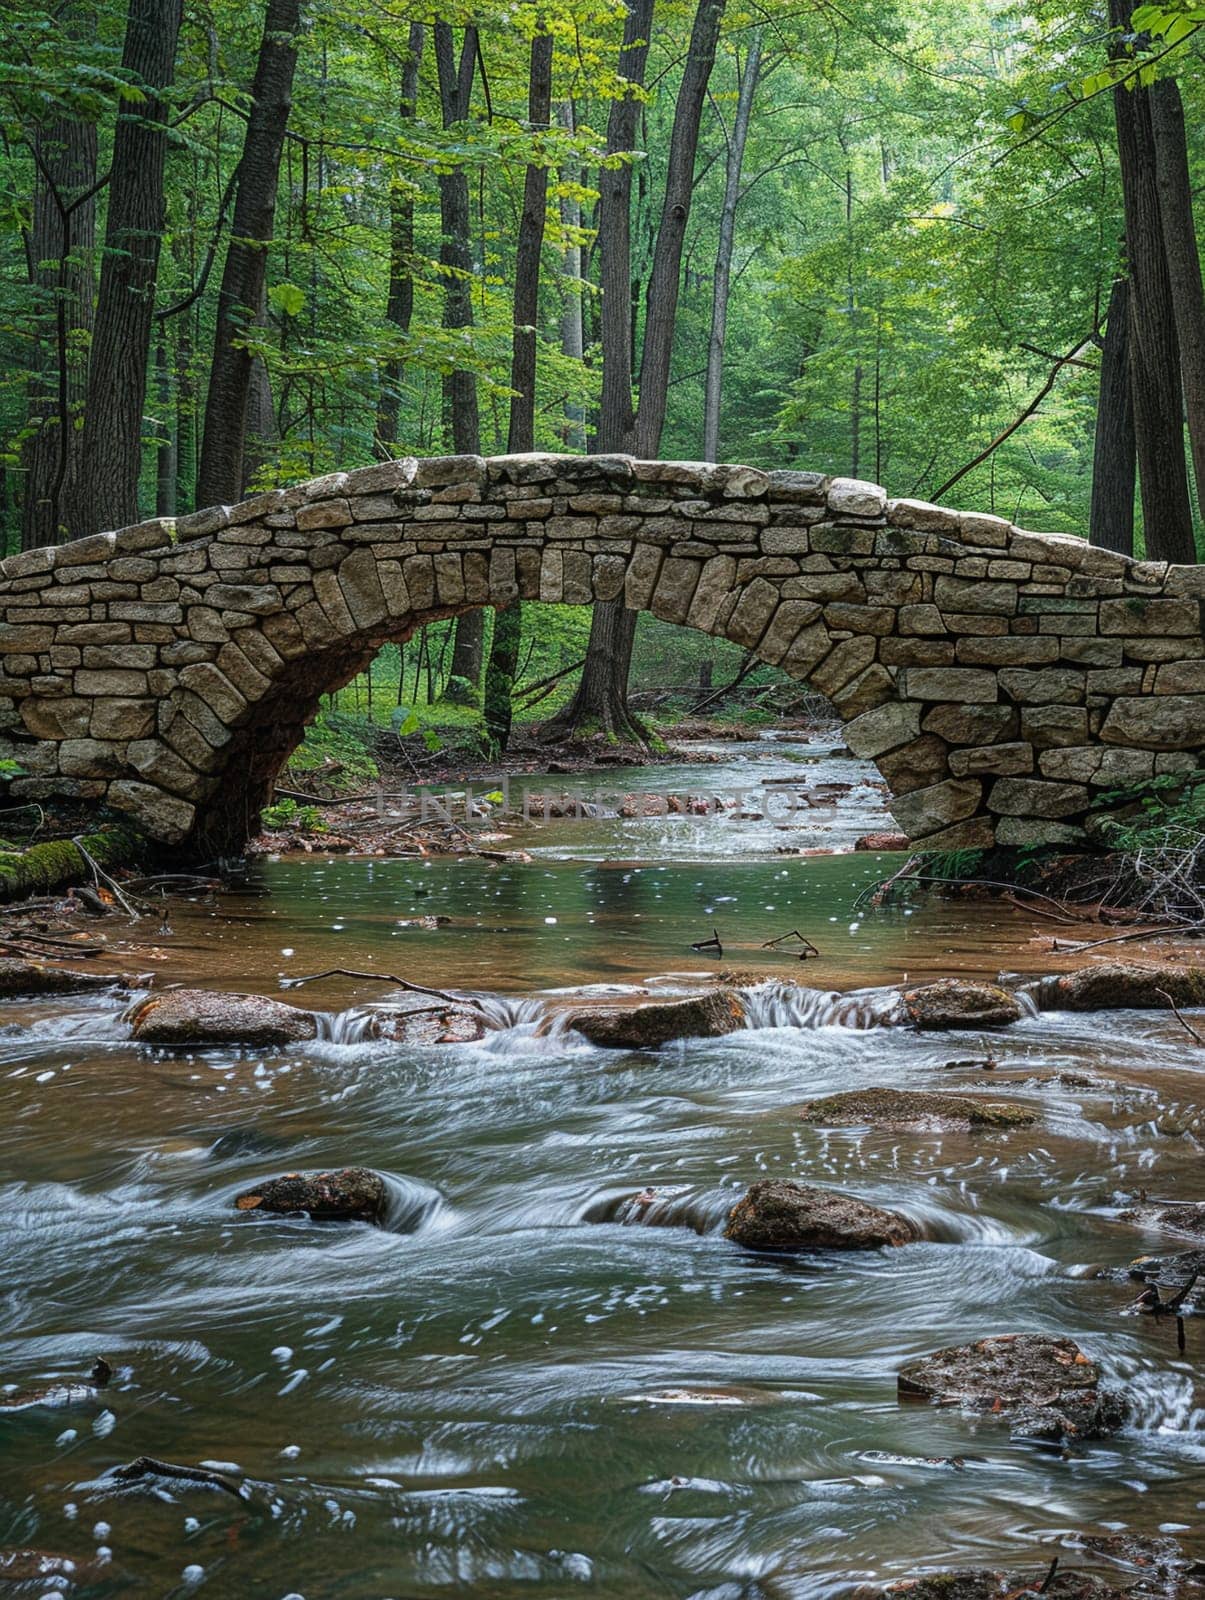 Arched Stone Bridge Spanning a Tranquil Forest Stream, The stones blur with the water, an enduring path over whispering waters.